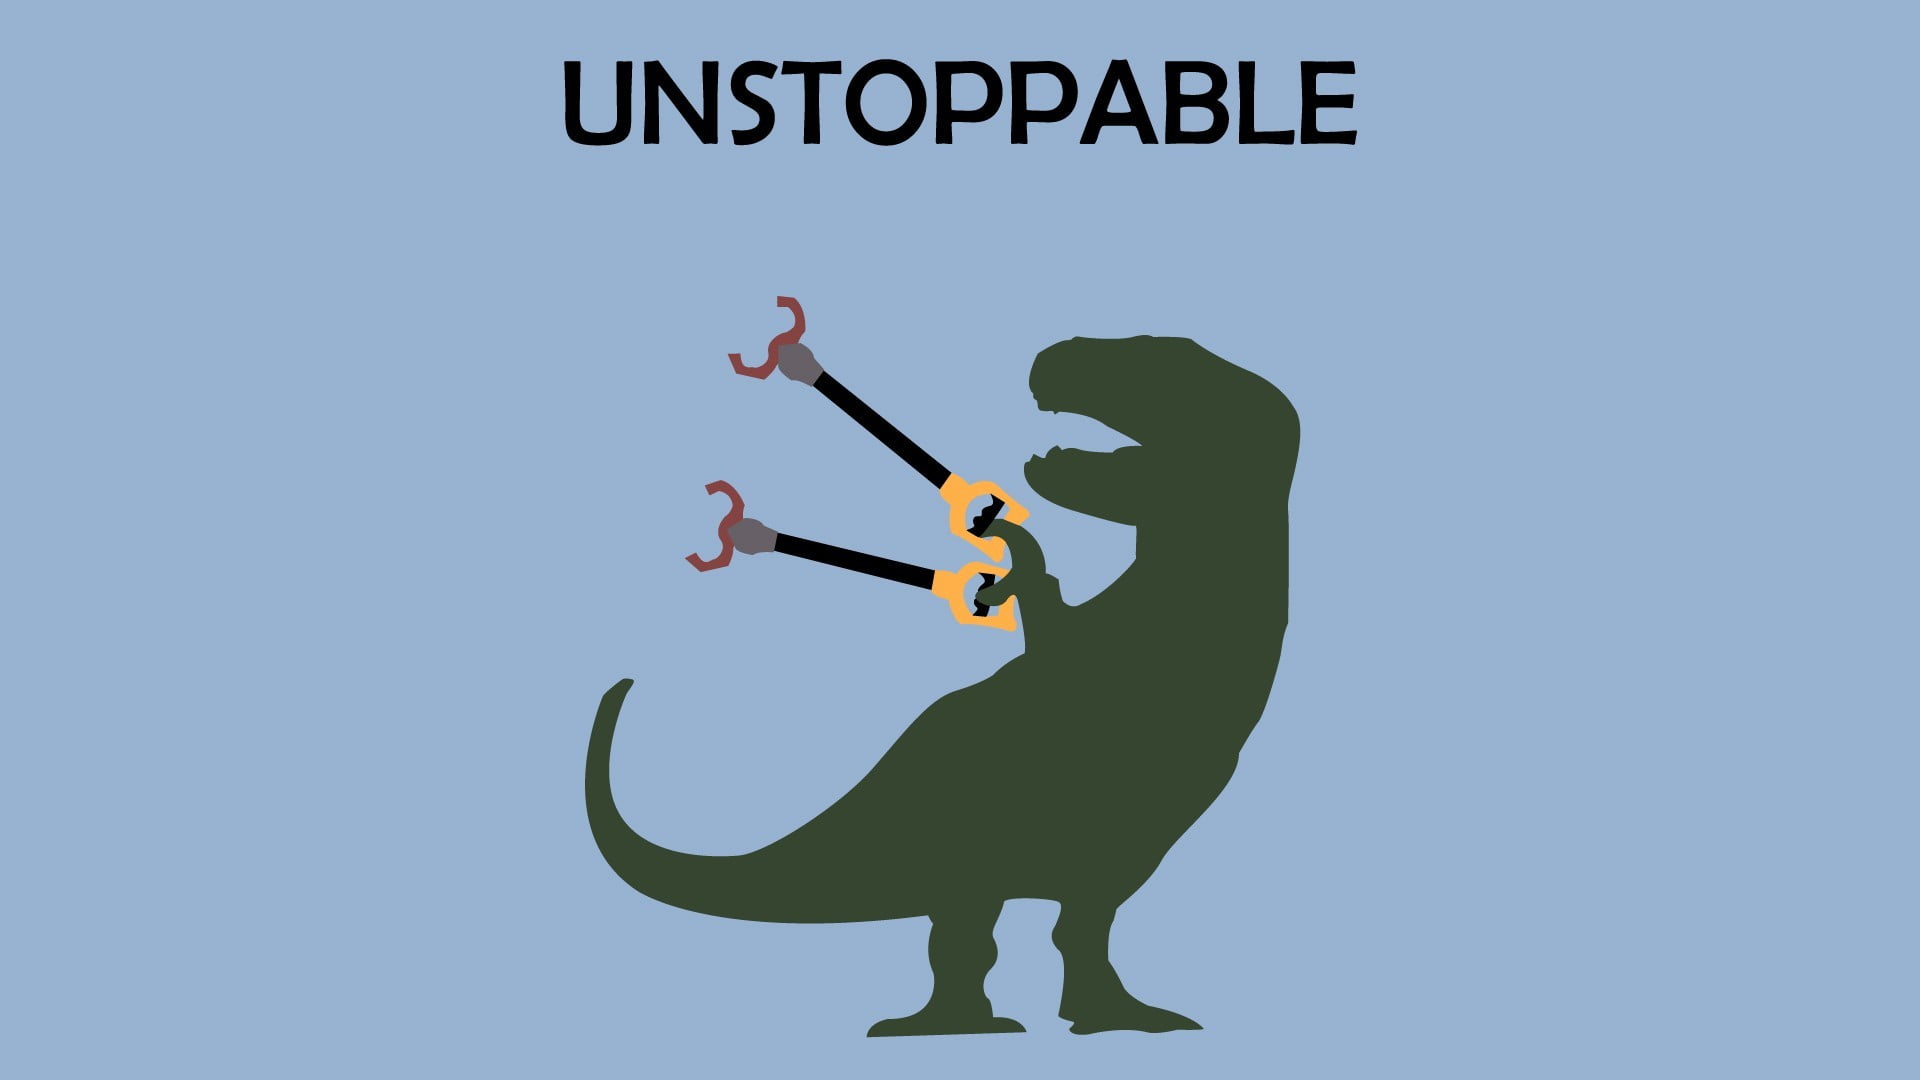 silhouette T-Rex holding tools and unstoppable text overlay HD wallpaper.